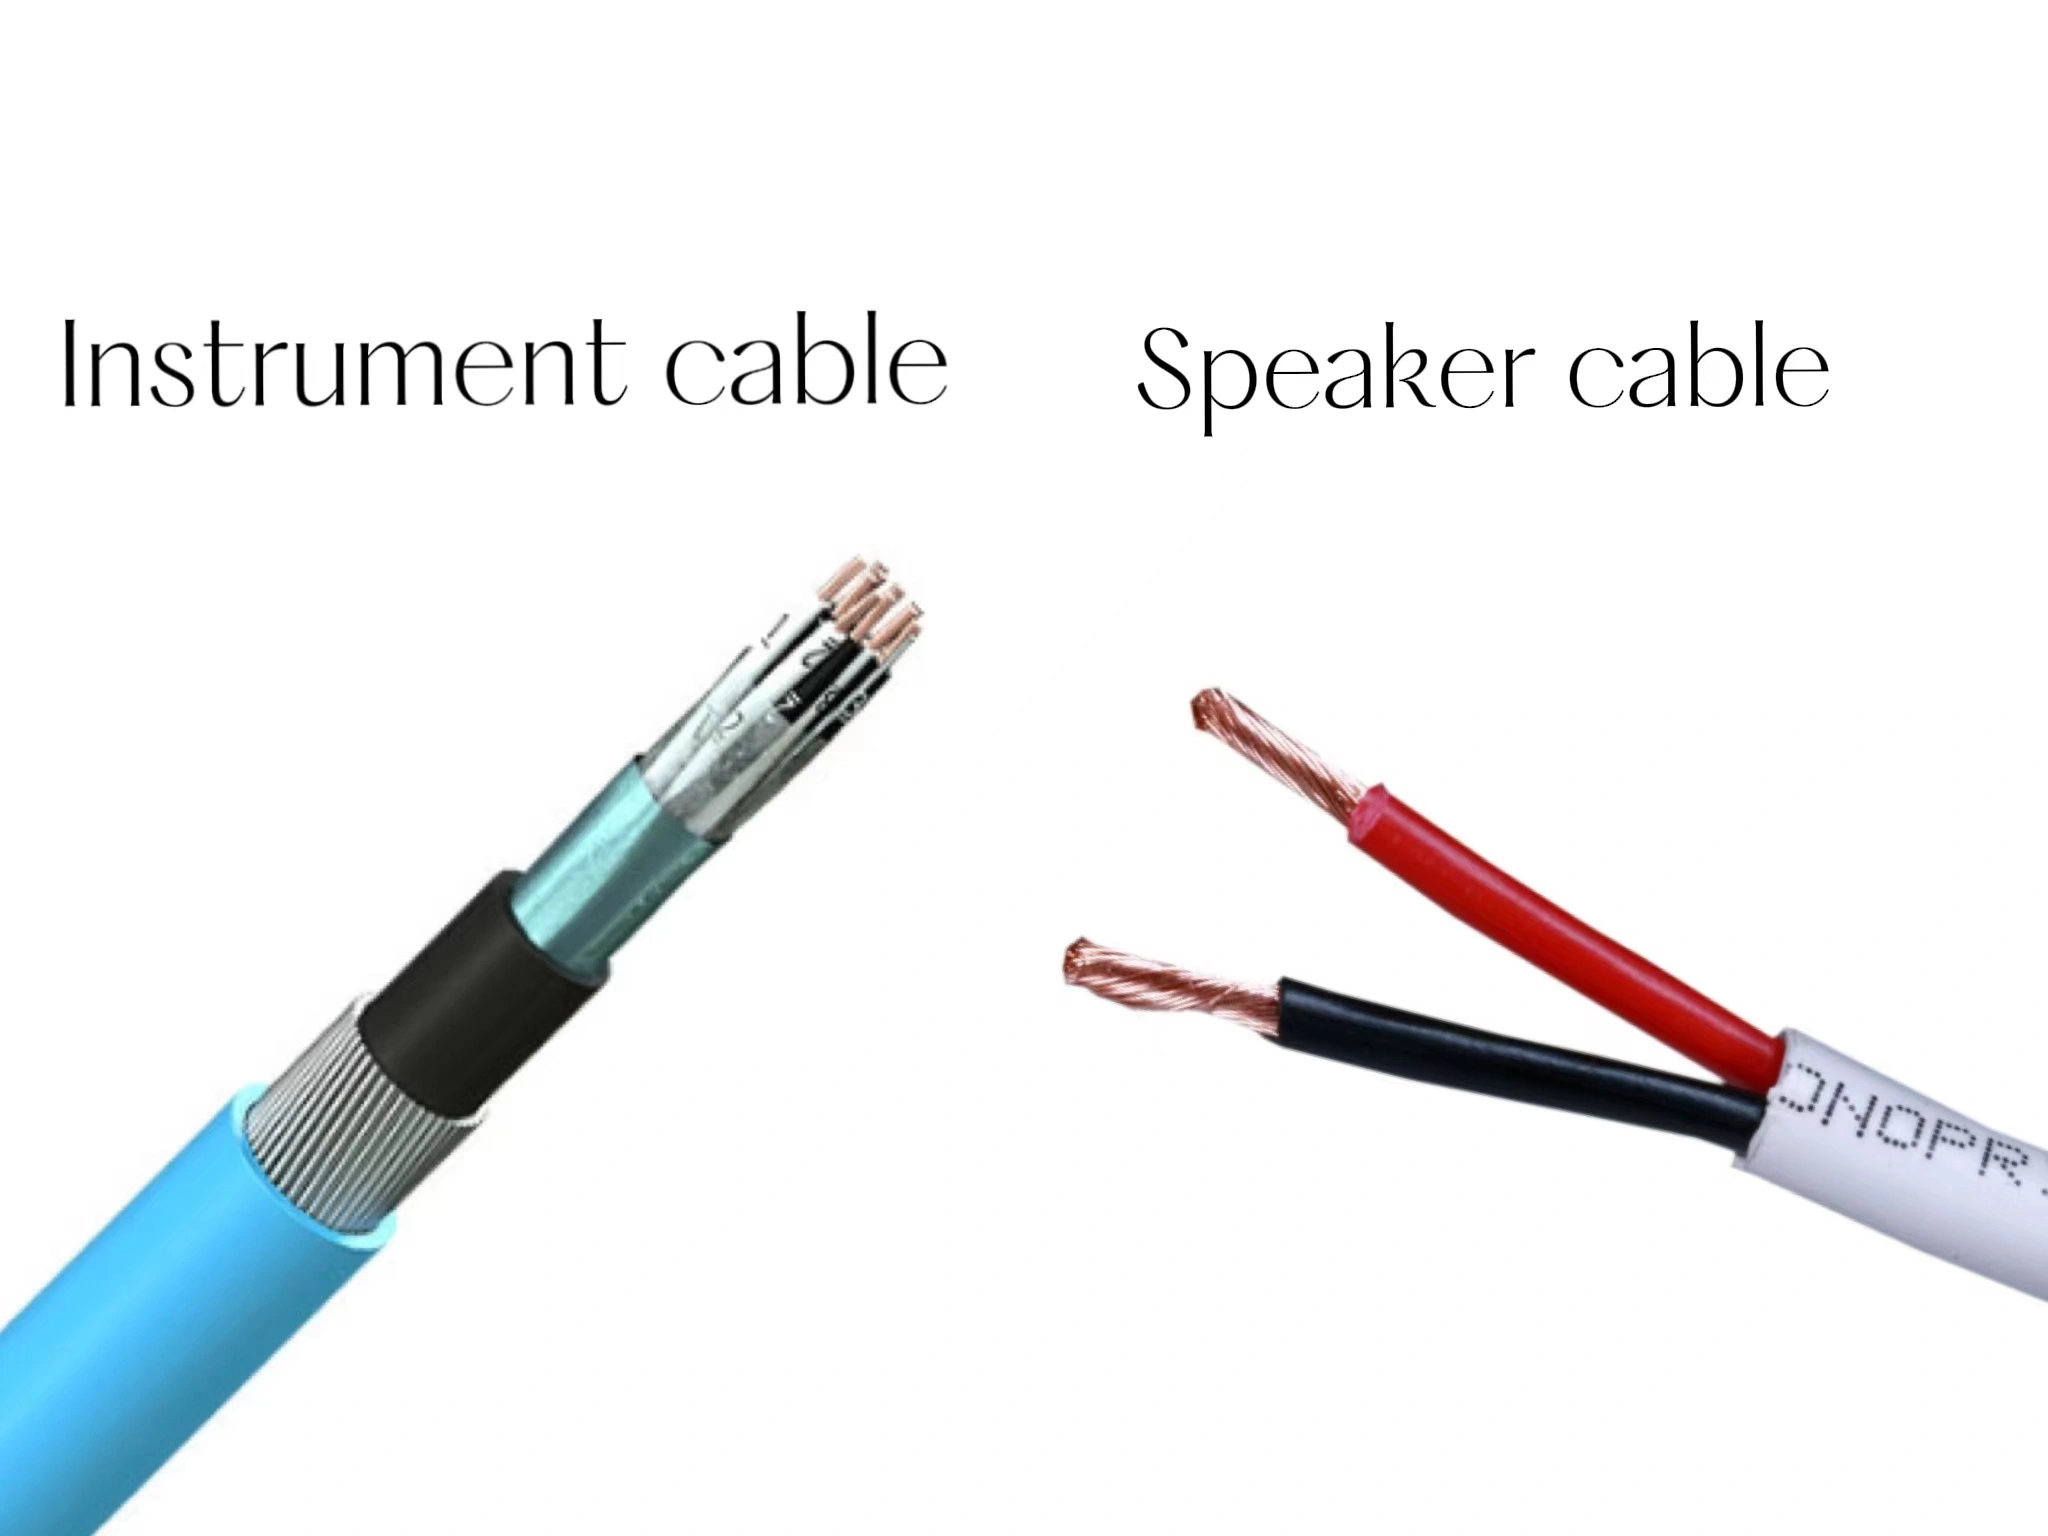 speaker cable vs instrument cable